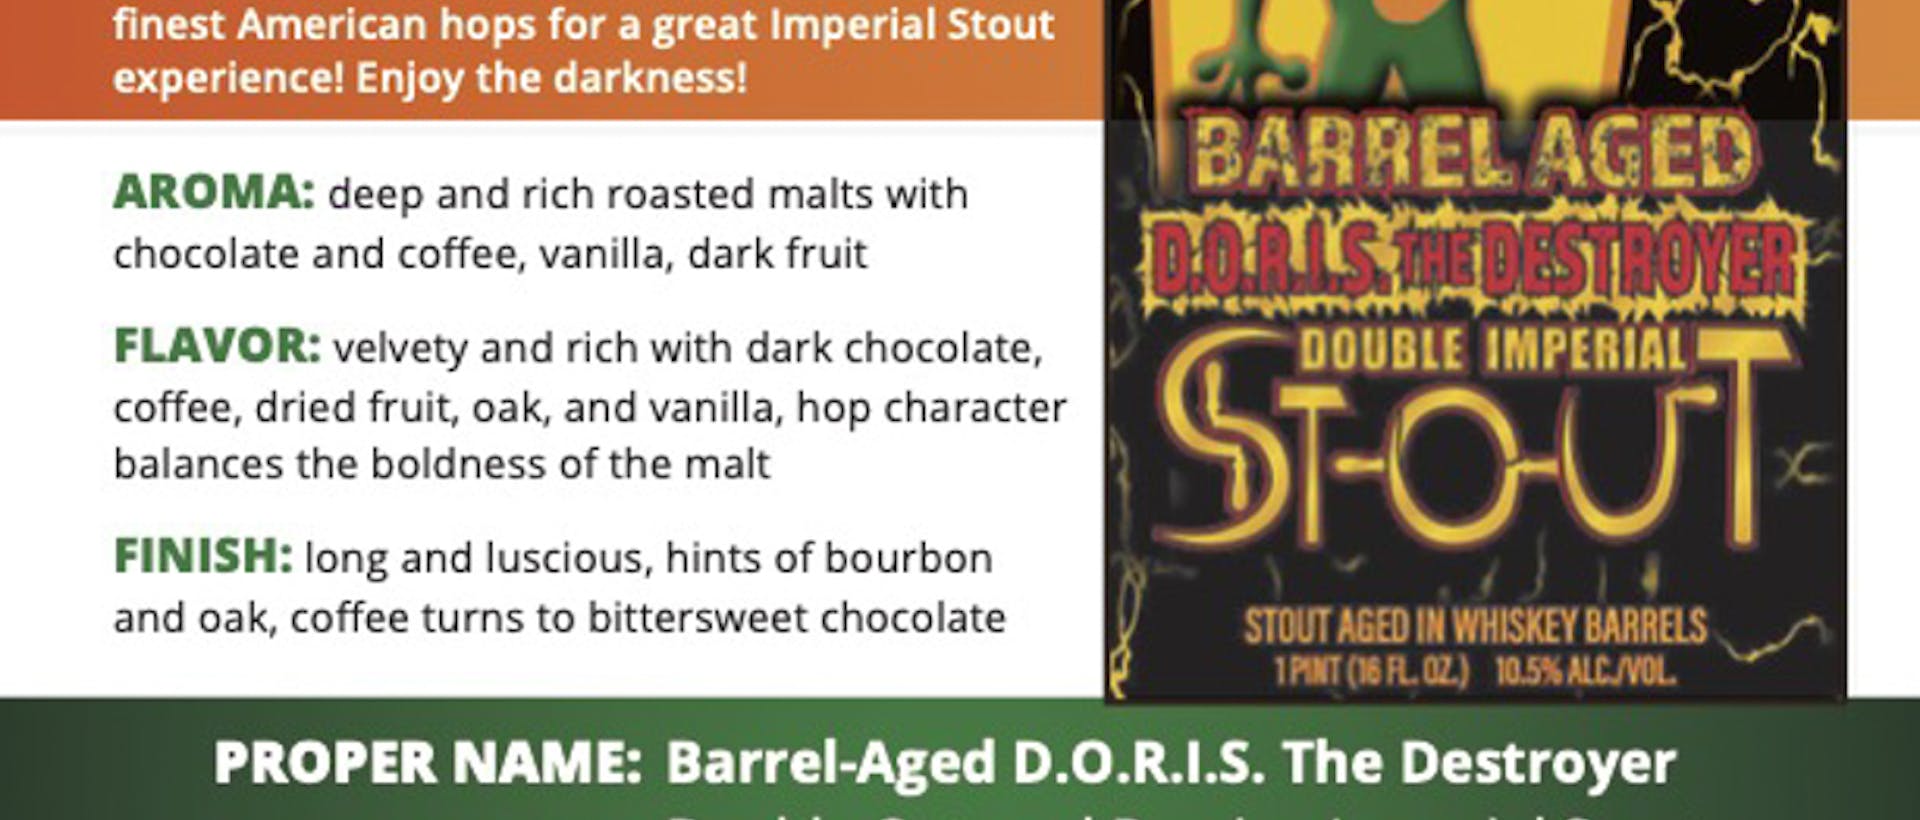 HF_Sell Sheet - Barrel-Aged Series - Barrel-Aged D.O.R.I.S. The Destroyer (updated 01-27-2022)